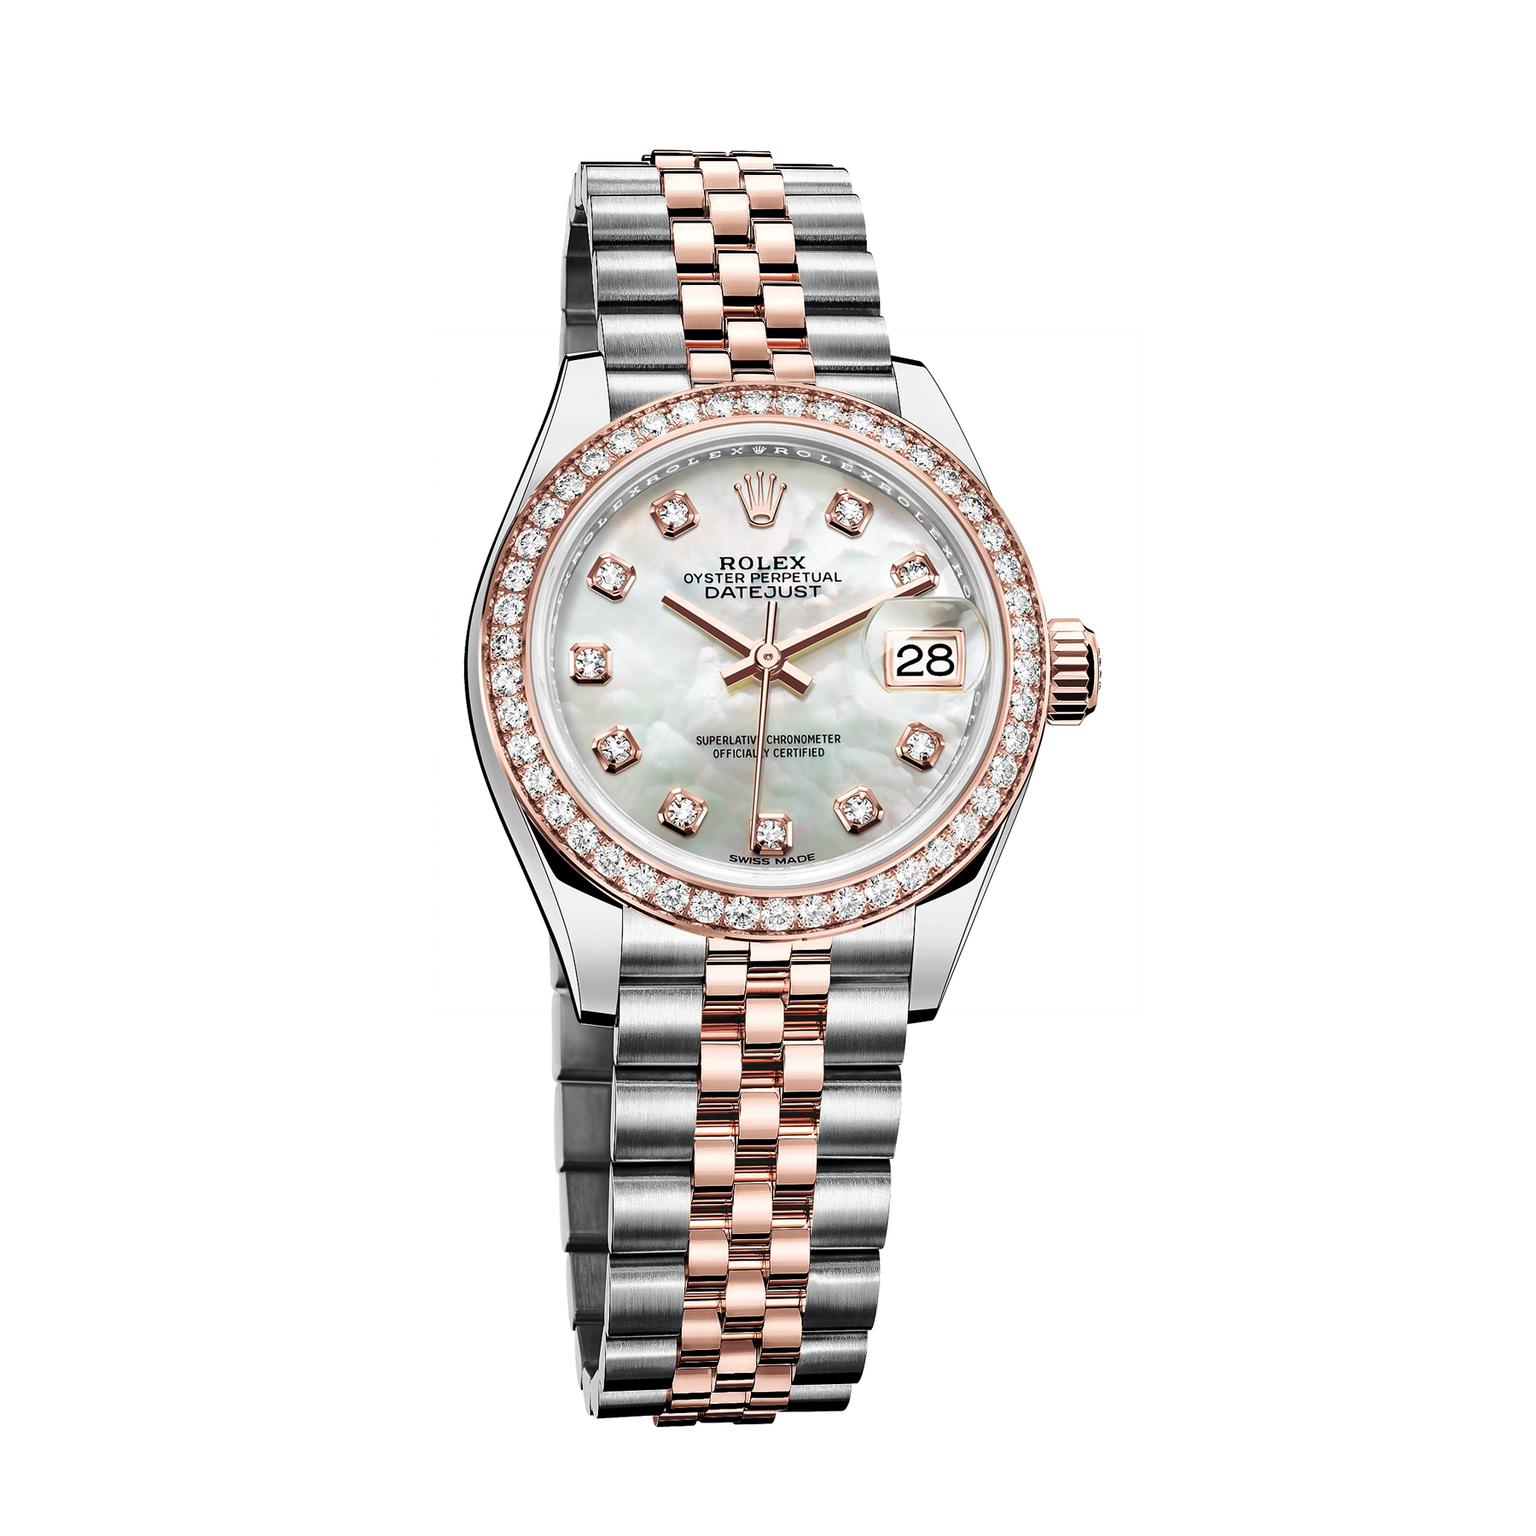 Rolex Lady Datejust 28mm watch in Everose gold and steel